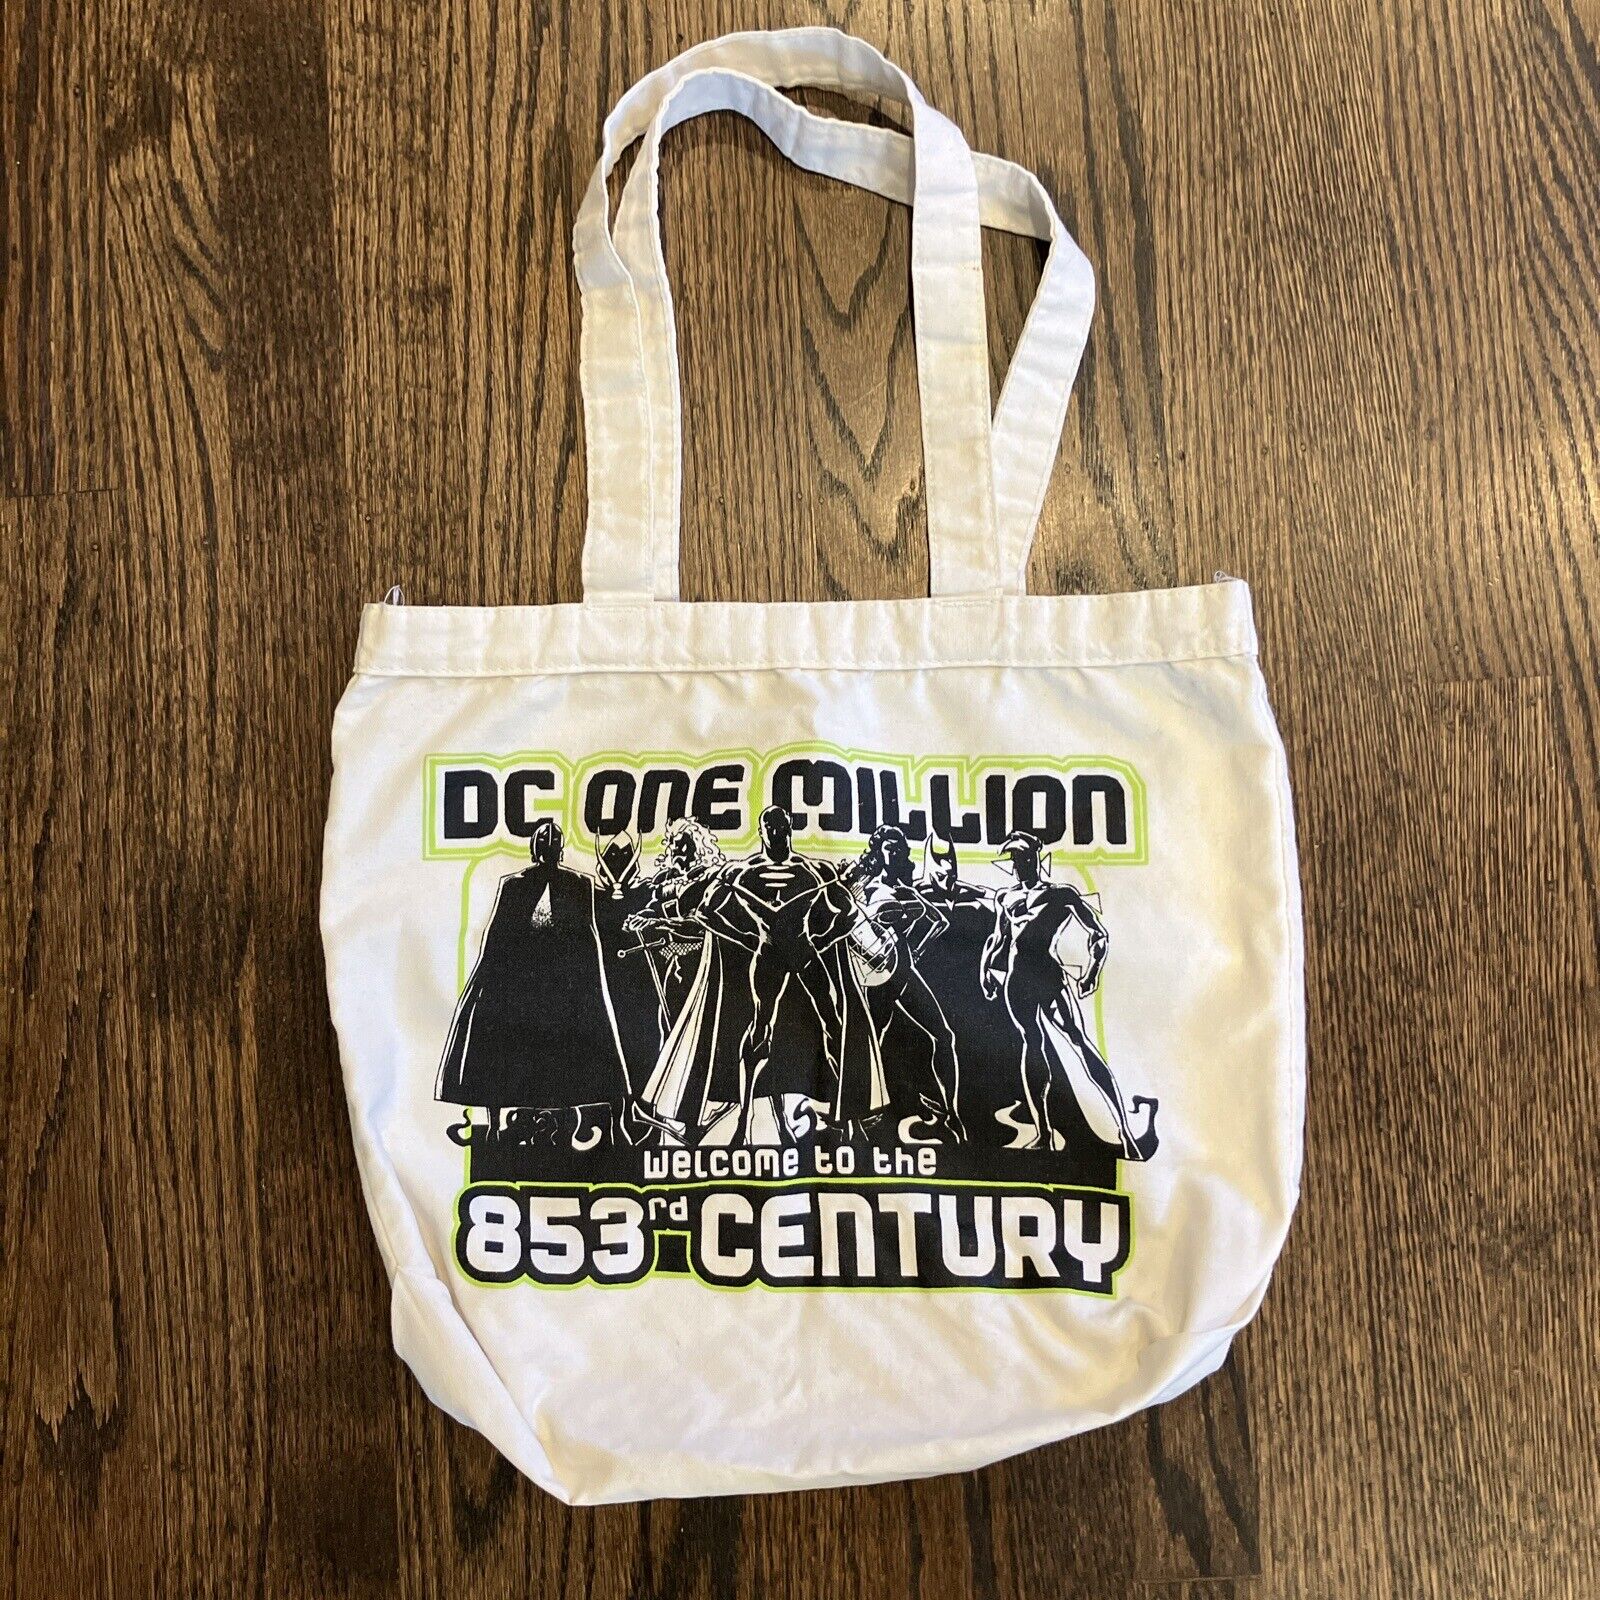 VTG DC Comics Tote Bag One Million 853rd Century 1998 Connections August 10-12